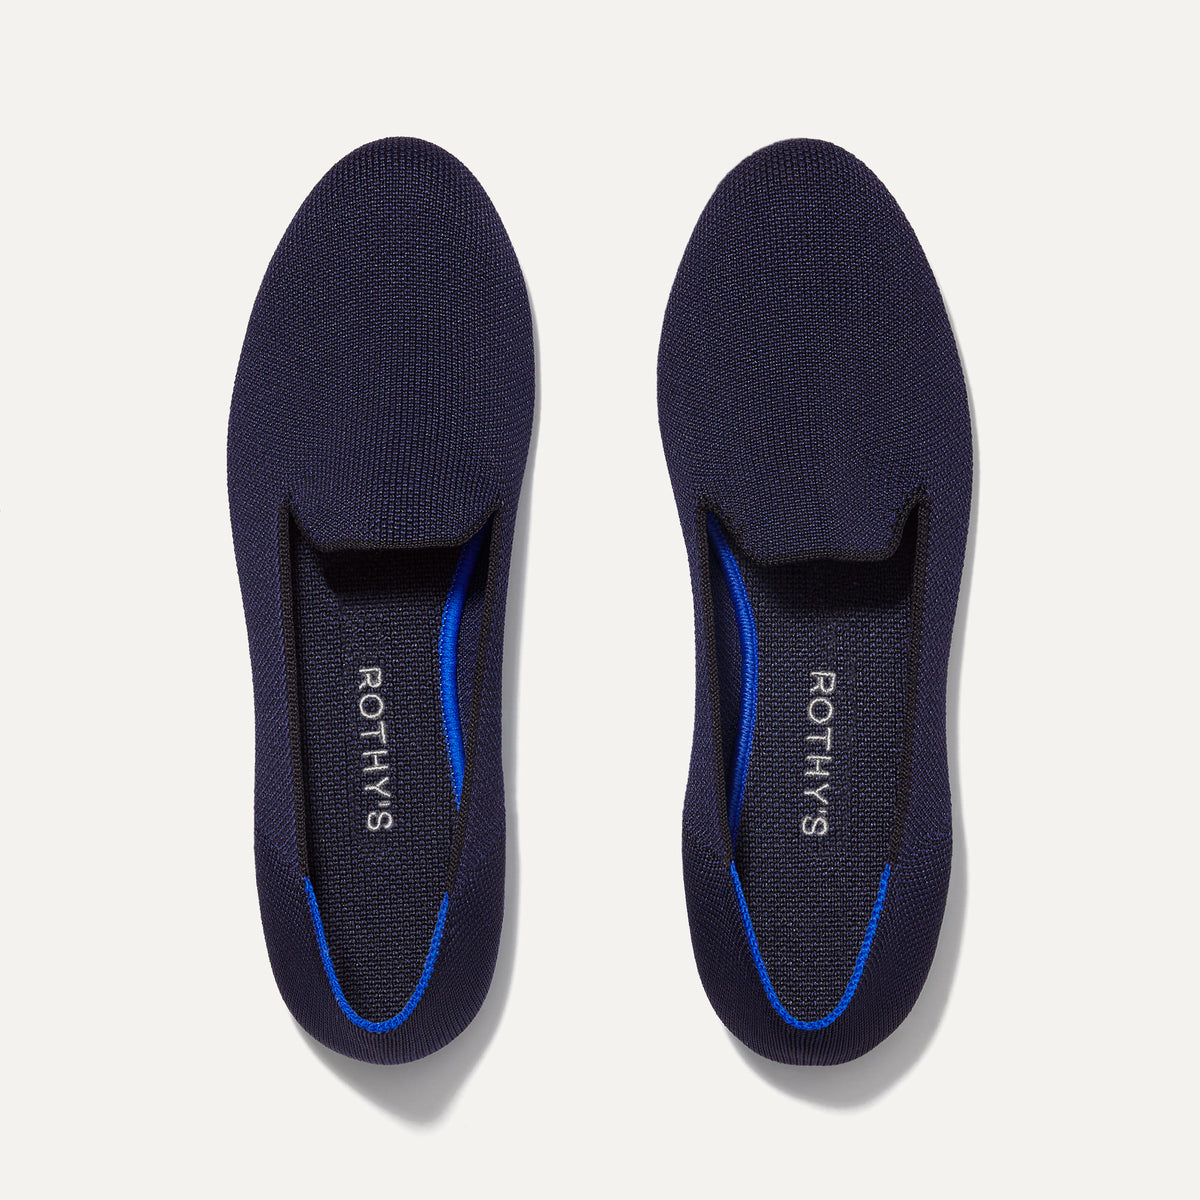 The Loafer in Navy | Women's Shoes | Rothy's